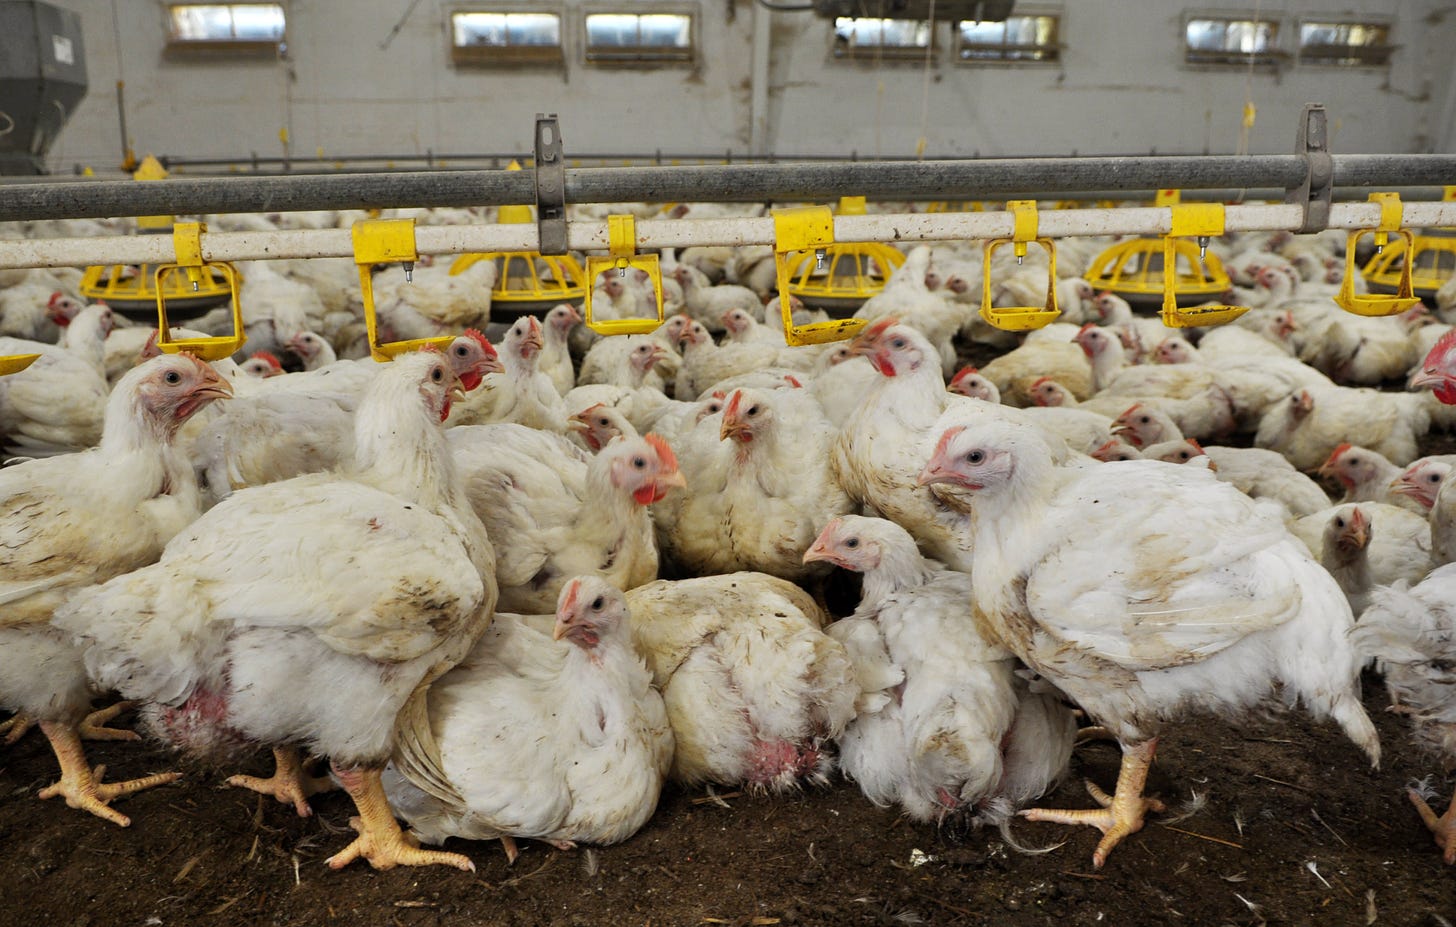 Broiler chickens stand crowded together in a typical factory farm setting.